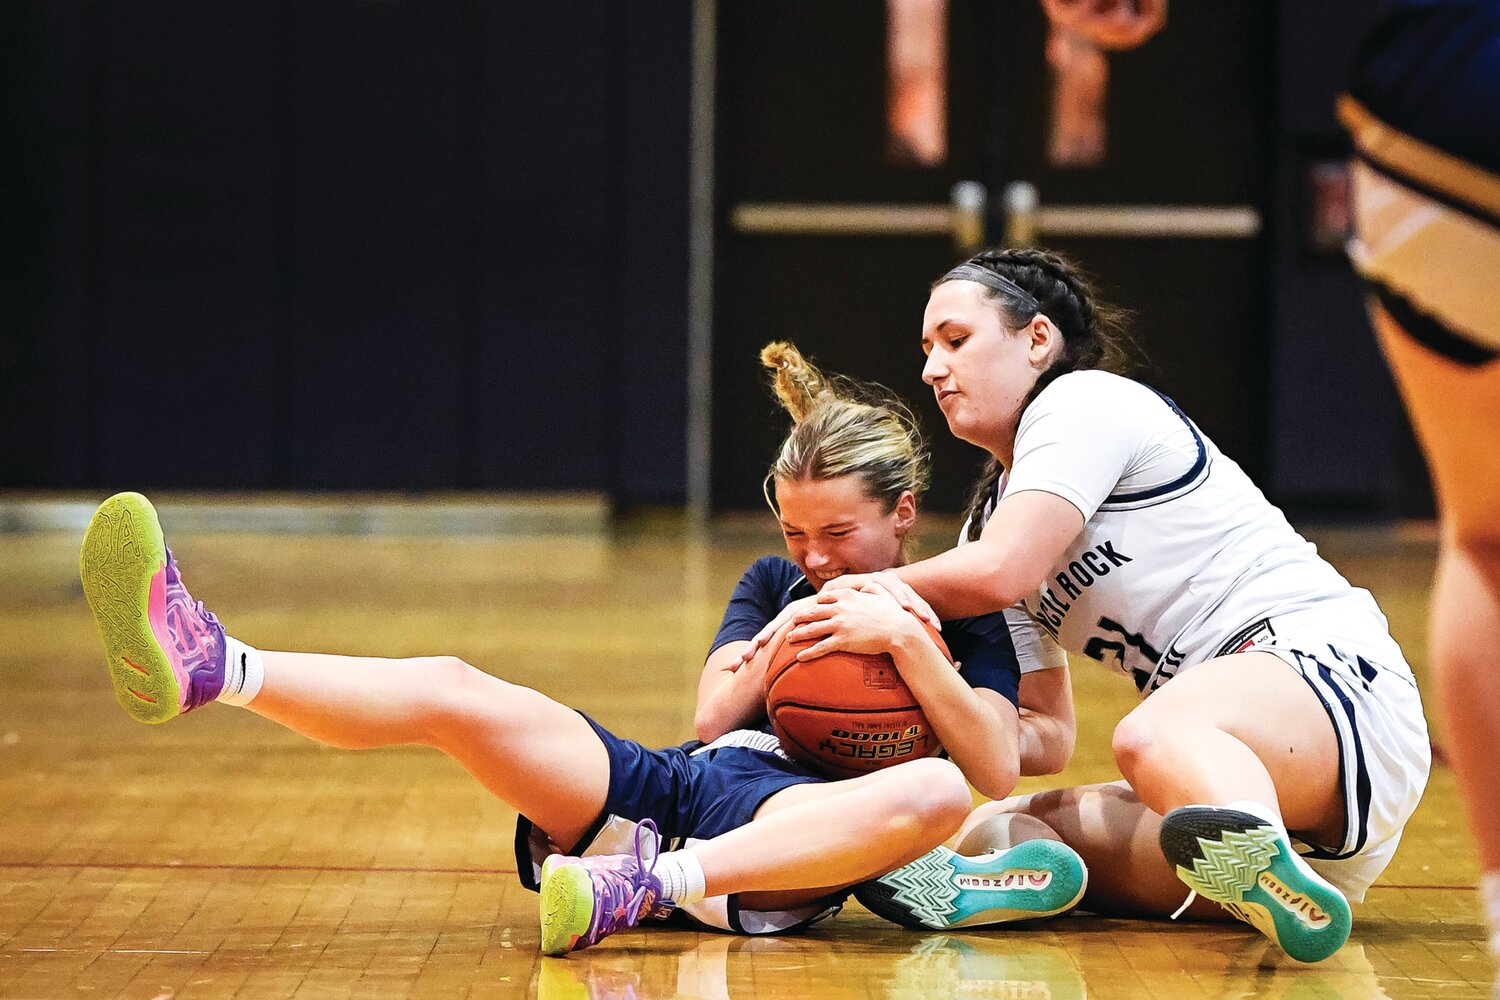 Council Rock South’s Lily Bross wrestles a loose ball away from Council Rock North’s Delaney McCaffery.